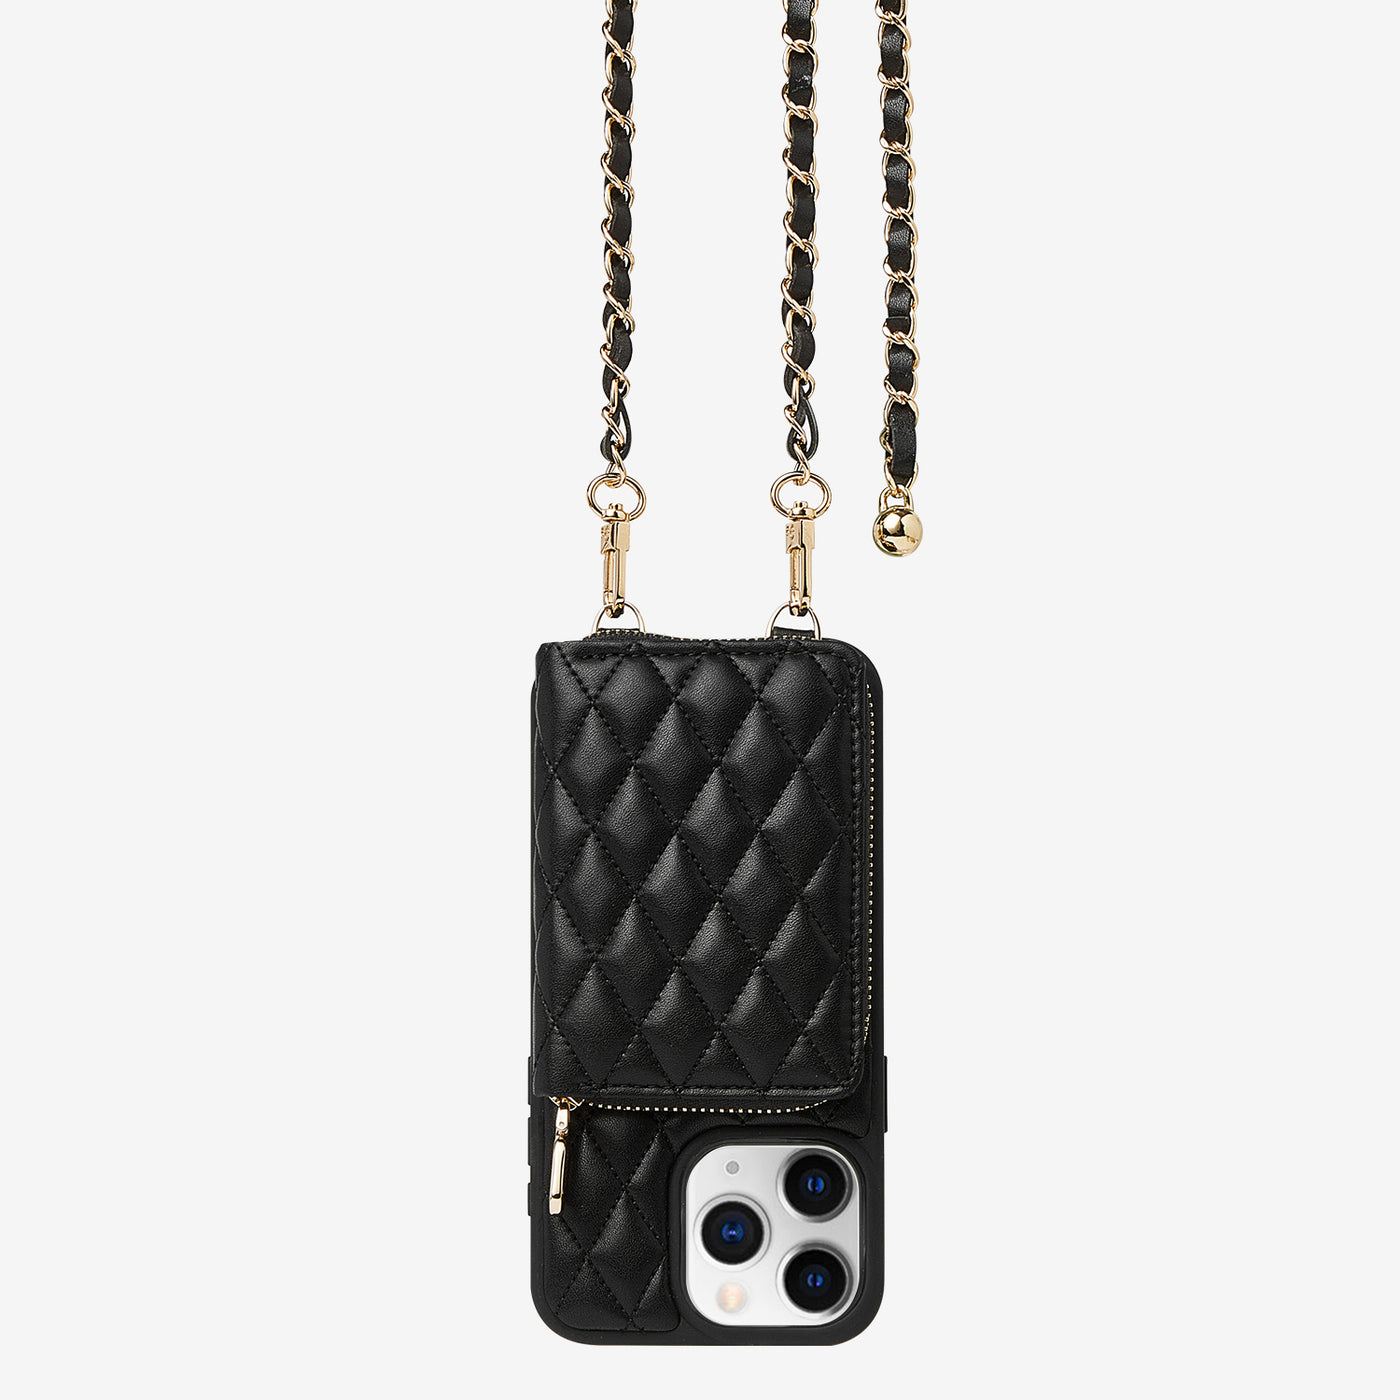 LuxeCharm- Argyle Phone Case with Chain Strap with adjustble Wrist band 